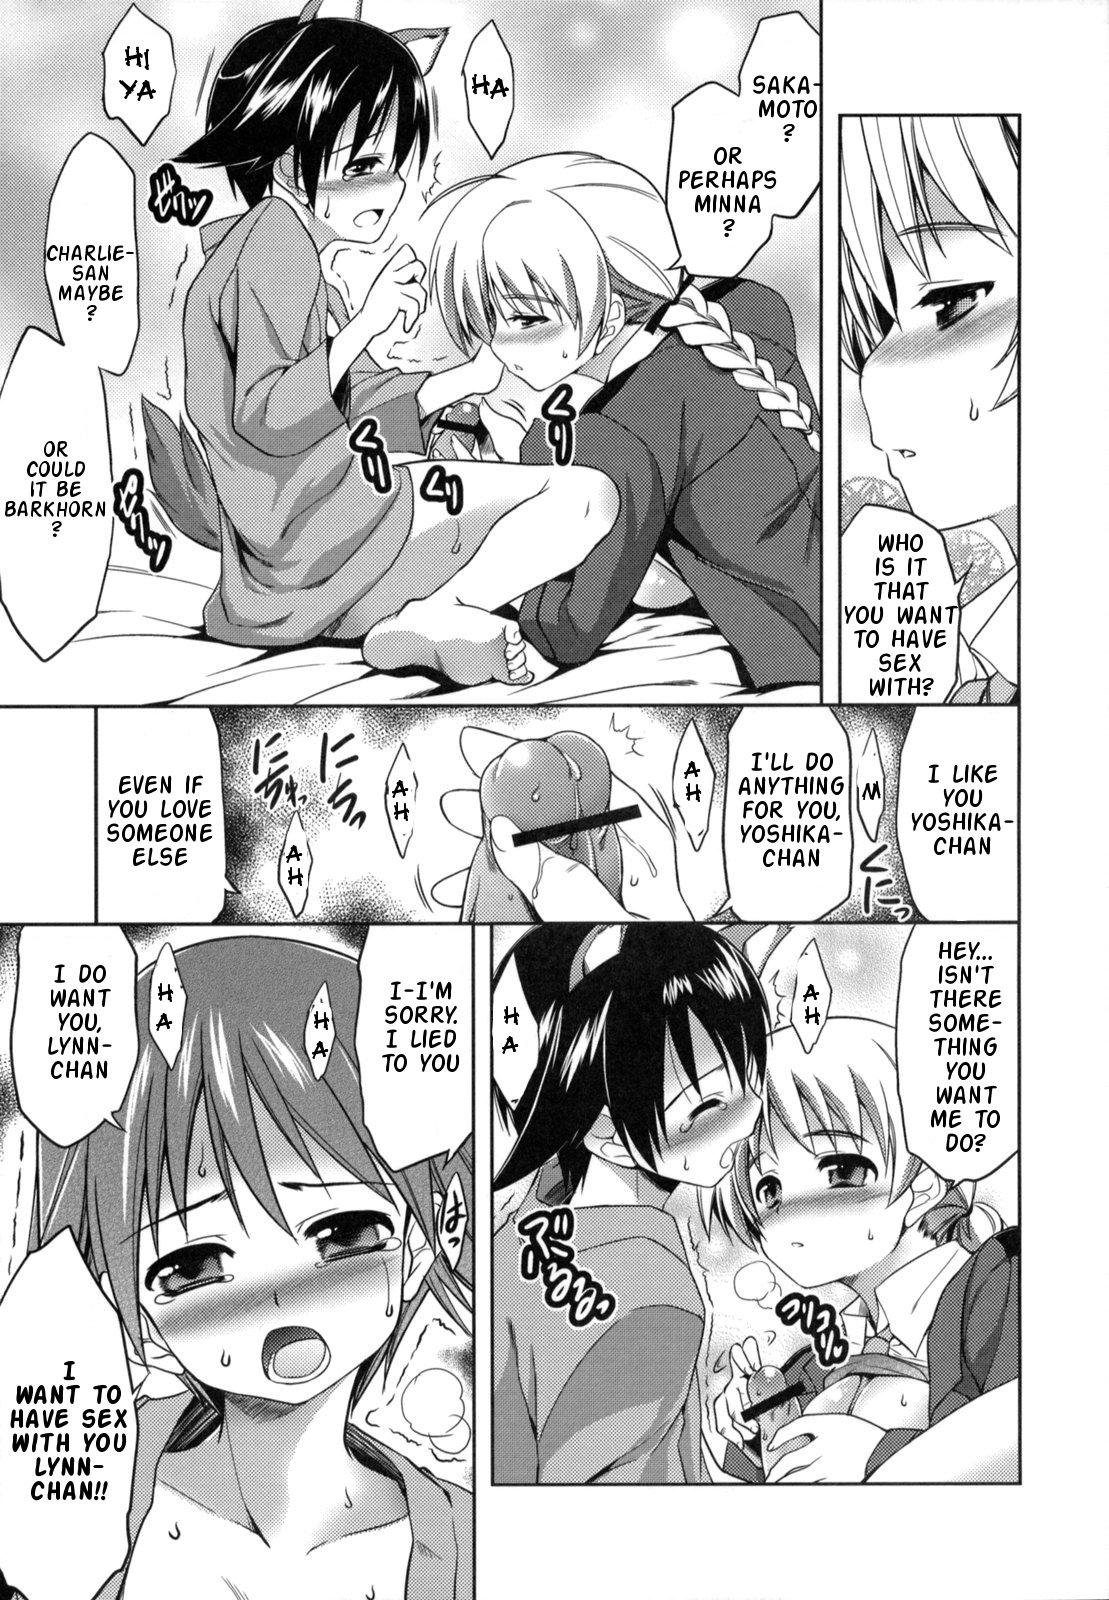 Wet GL WITCHES - Strike witches Stepdad - Page 6